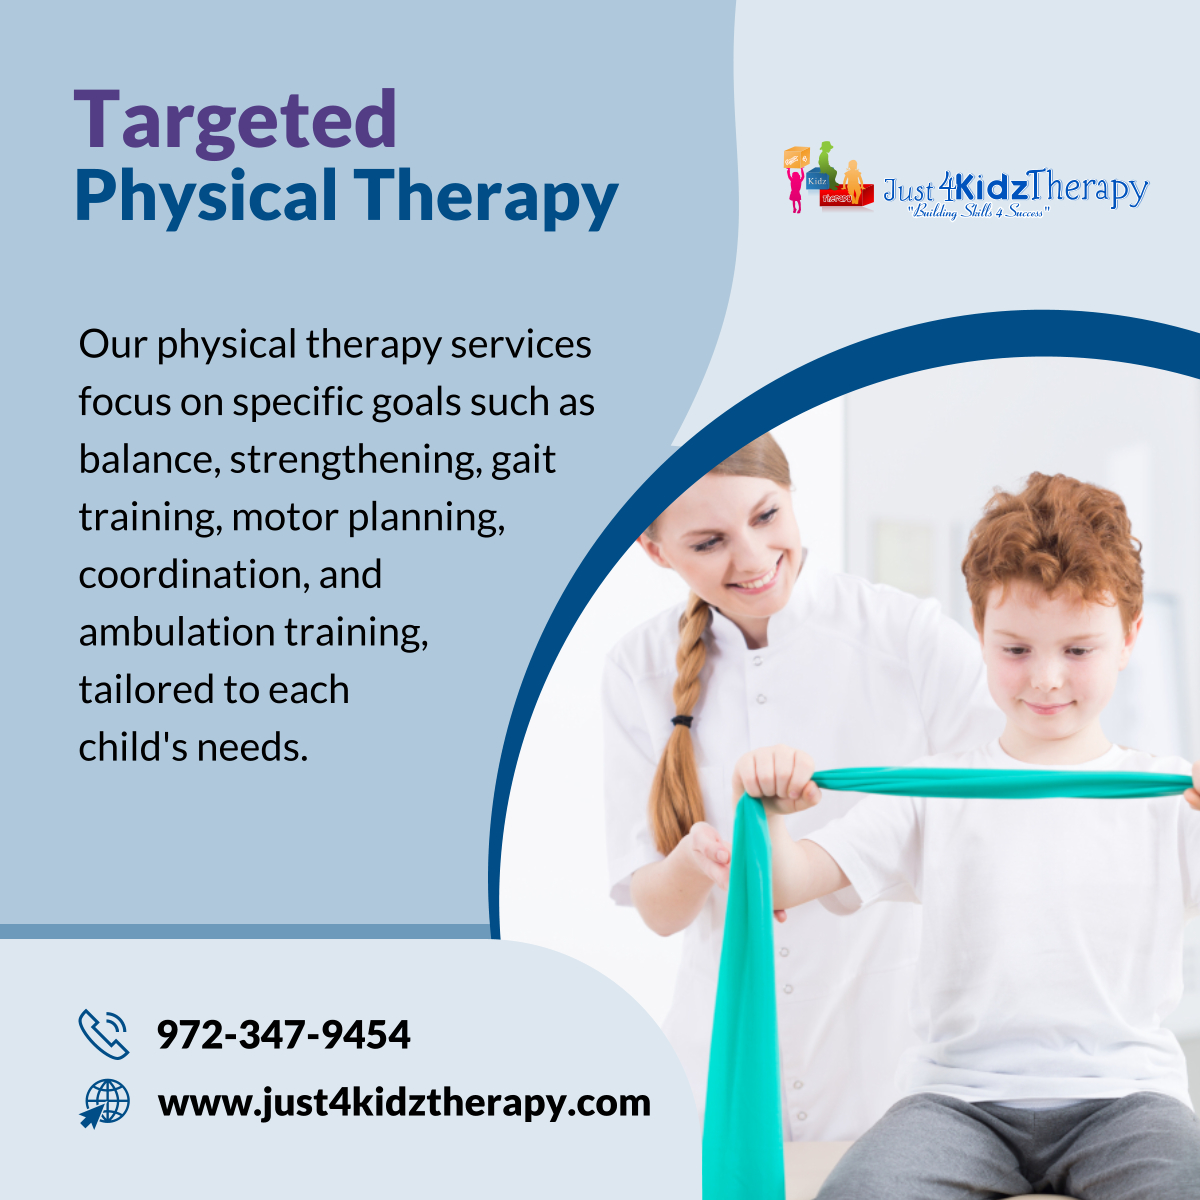 Unlock your child's physical potential with our targeted physical therapy services. Let us help them achieve their milestones with confidence. 

#CollinCountyTX #PediatricTherapyServices #PhysicalTherapy #ChildDevelopment #Mobility